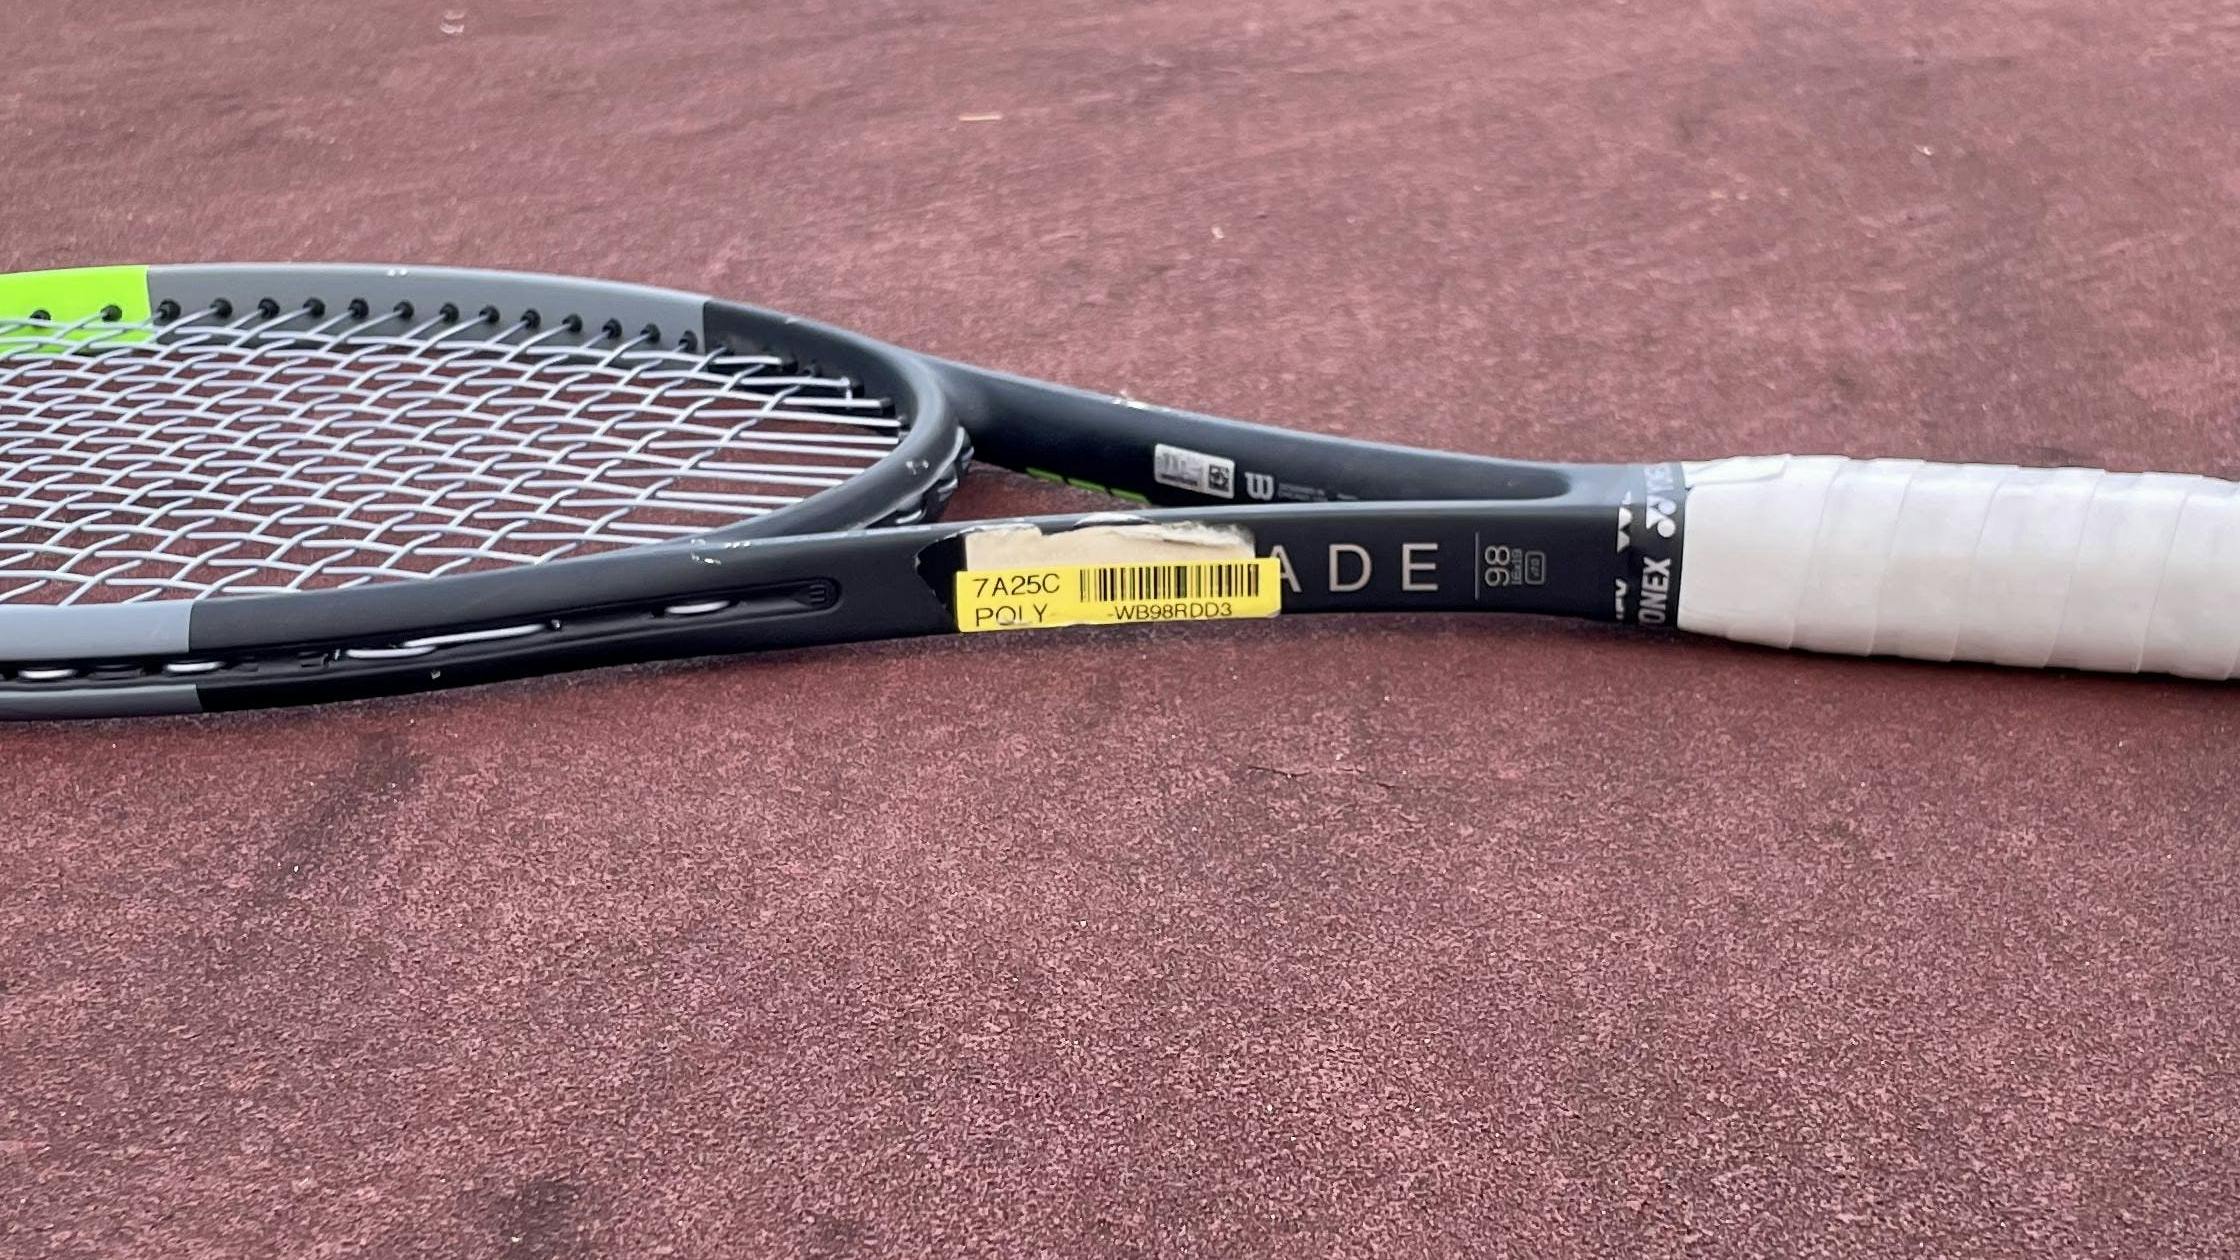 The Wilson Blade 98 V7 Racquet lying on a court. 